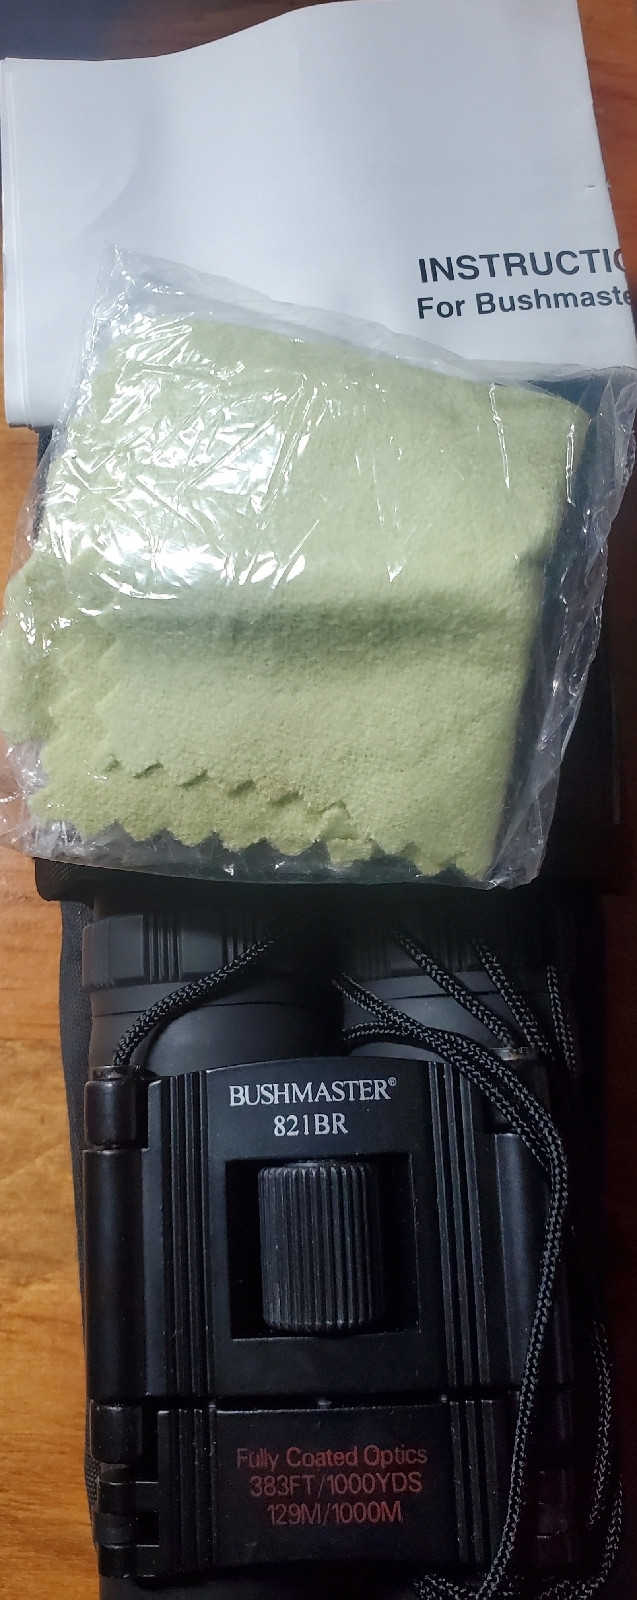 Bushmaster Binoculars 821br Fully Coated Optics 383 Dt /1000yds  in Fishing, Camping & Outdoors in Windsor Region